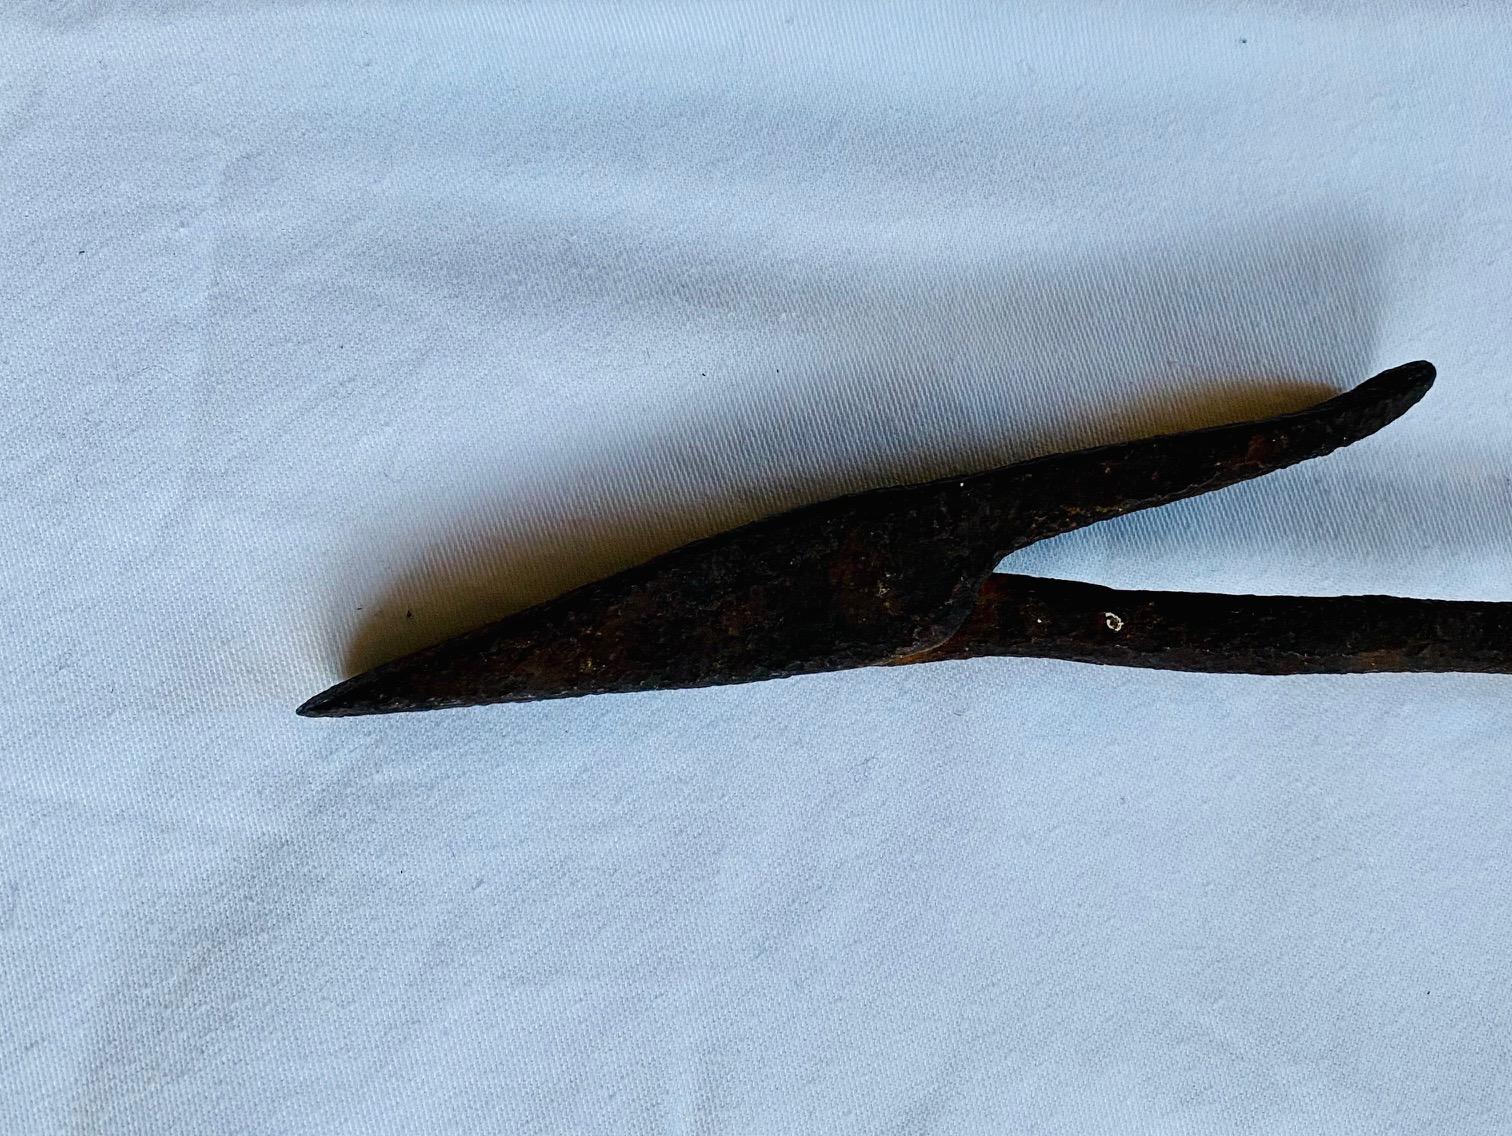 Early 19th century American Grommet Iron Harpoon, circa 1830, having a wide flat 5 - 1/2 inch long head with very slight rise to the rear edge, pivoting on the pierced disc end of the 1/4 inch diameter shank ending in socket with open seam. The